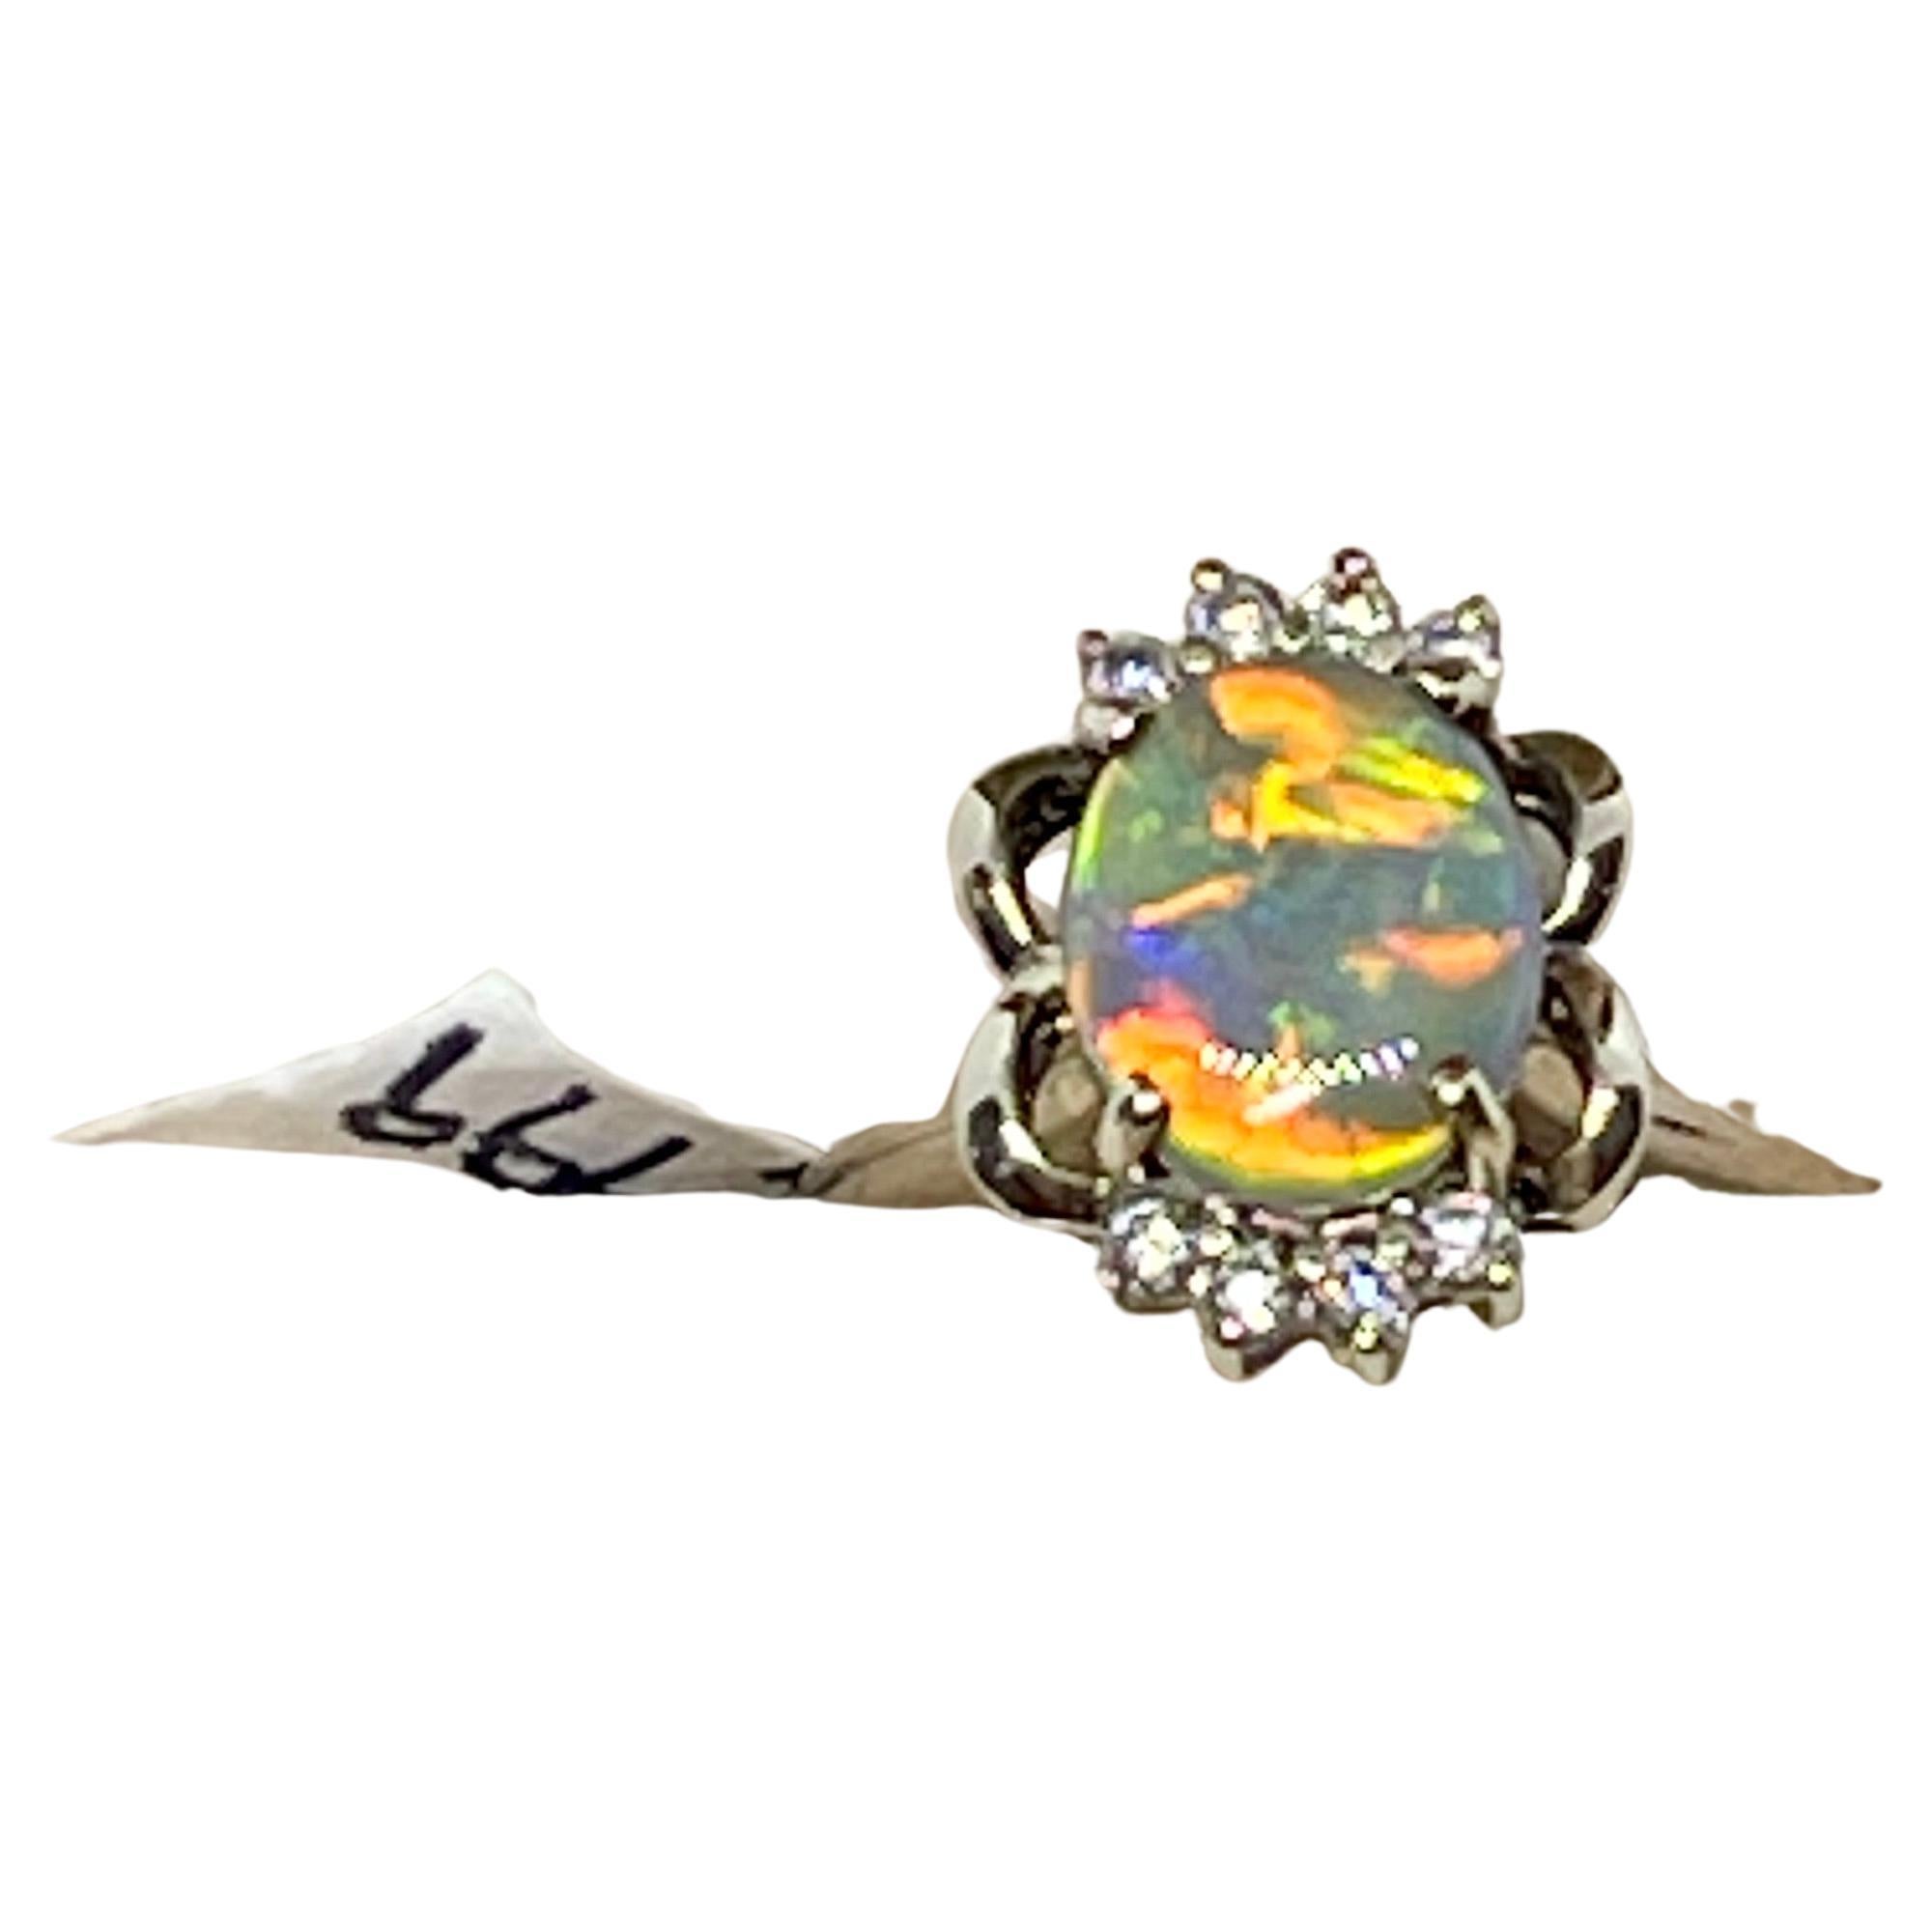 Rare Harlequin Pattern Solid Semi Black Opal Diamond Ring 9ct Gold Valuation For Sale